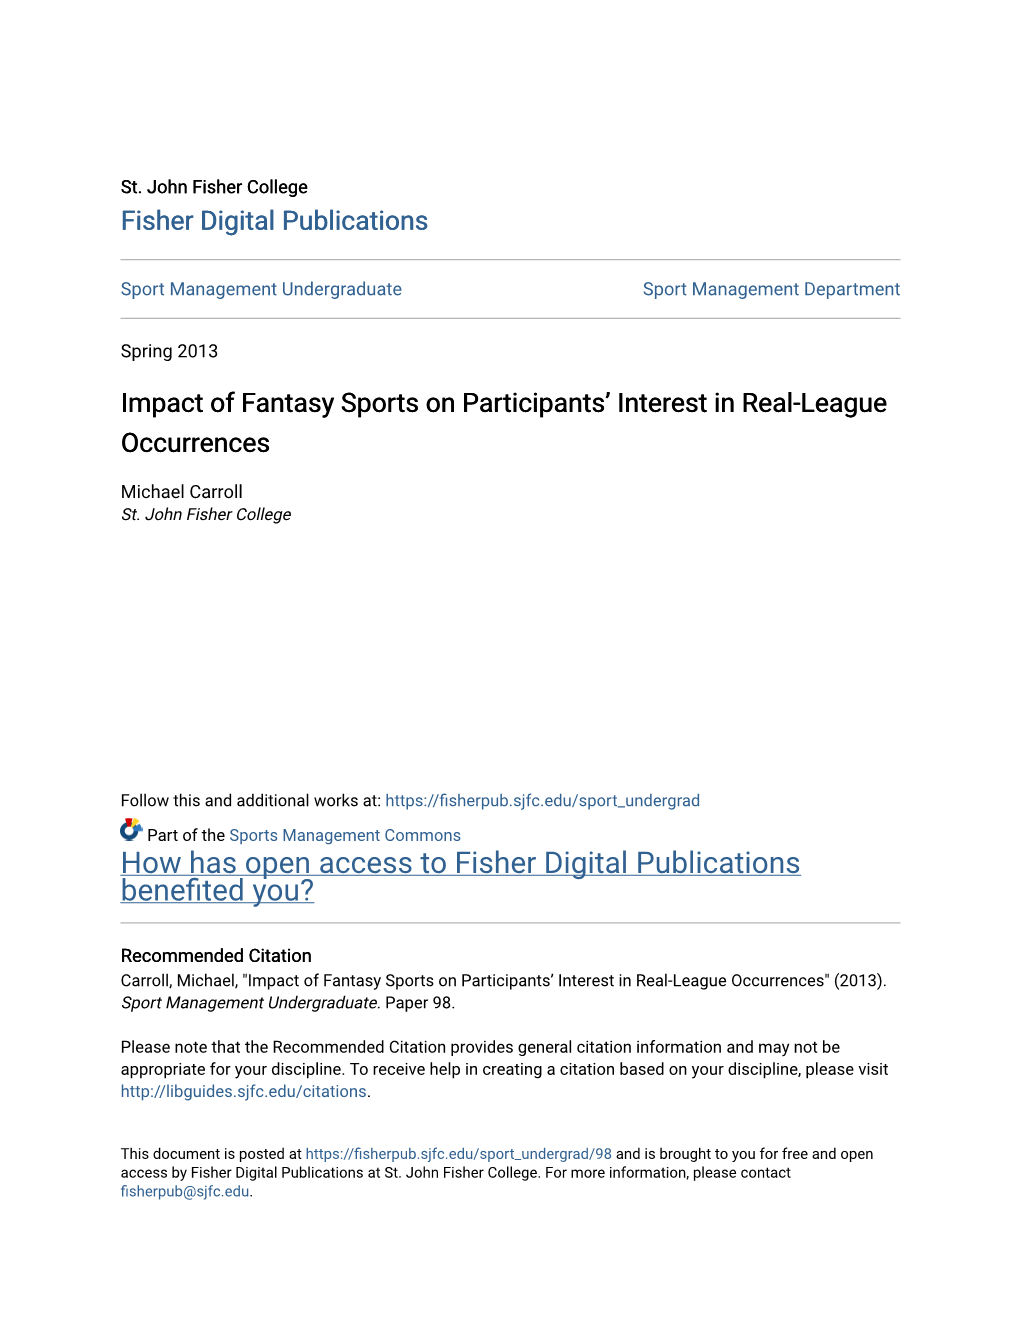 Impact of Fantasy Sports on Participants' Interest in Real-League Occurrences